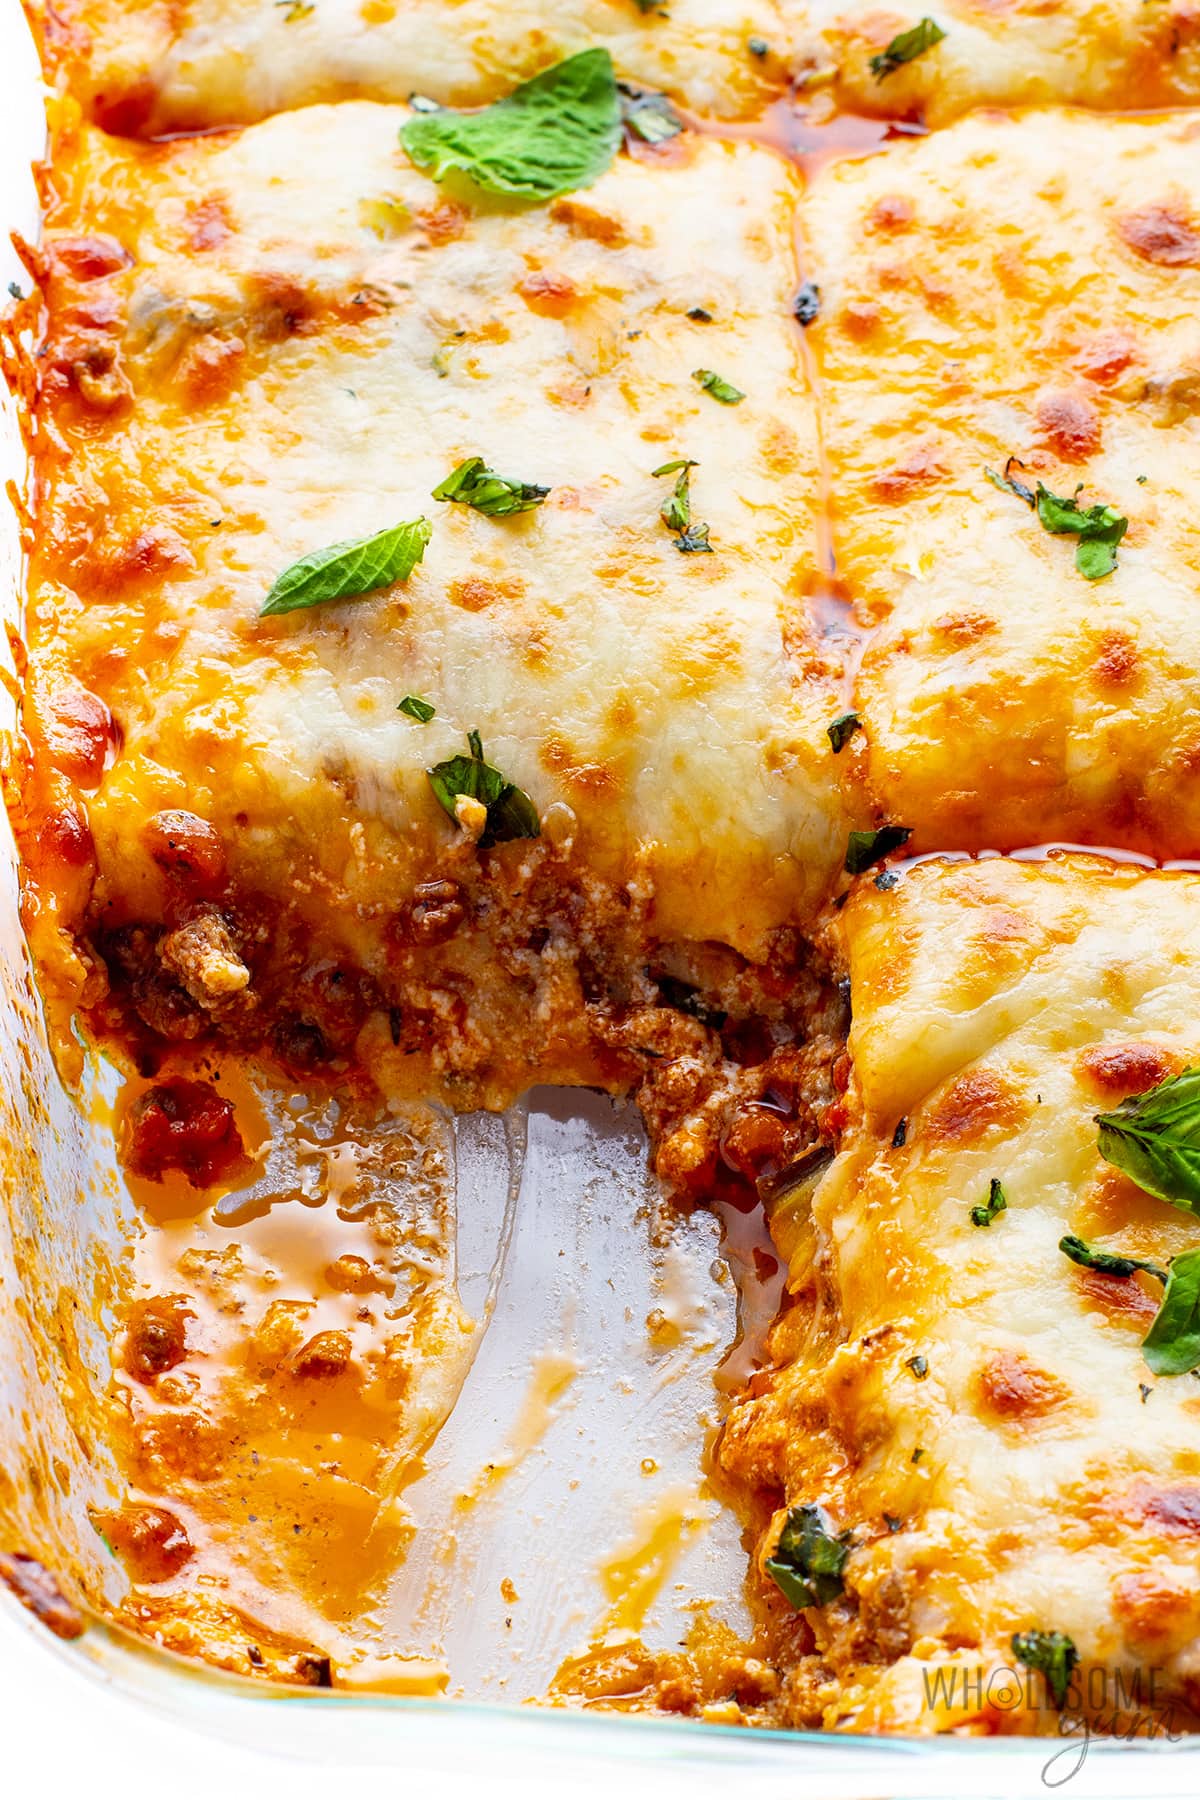 Showing the inside of lasagna with eggplant in a baking dish.